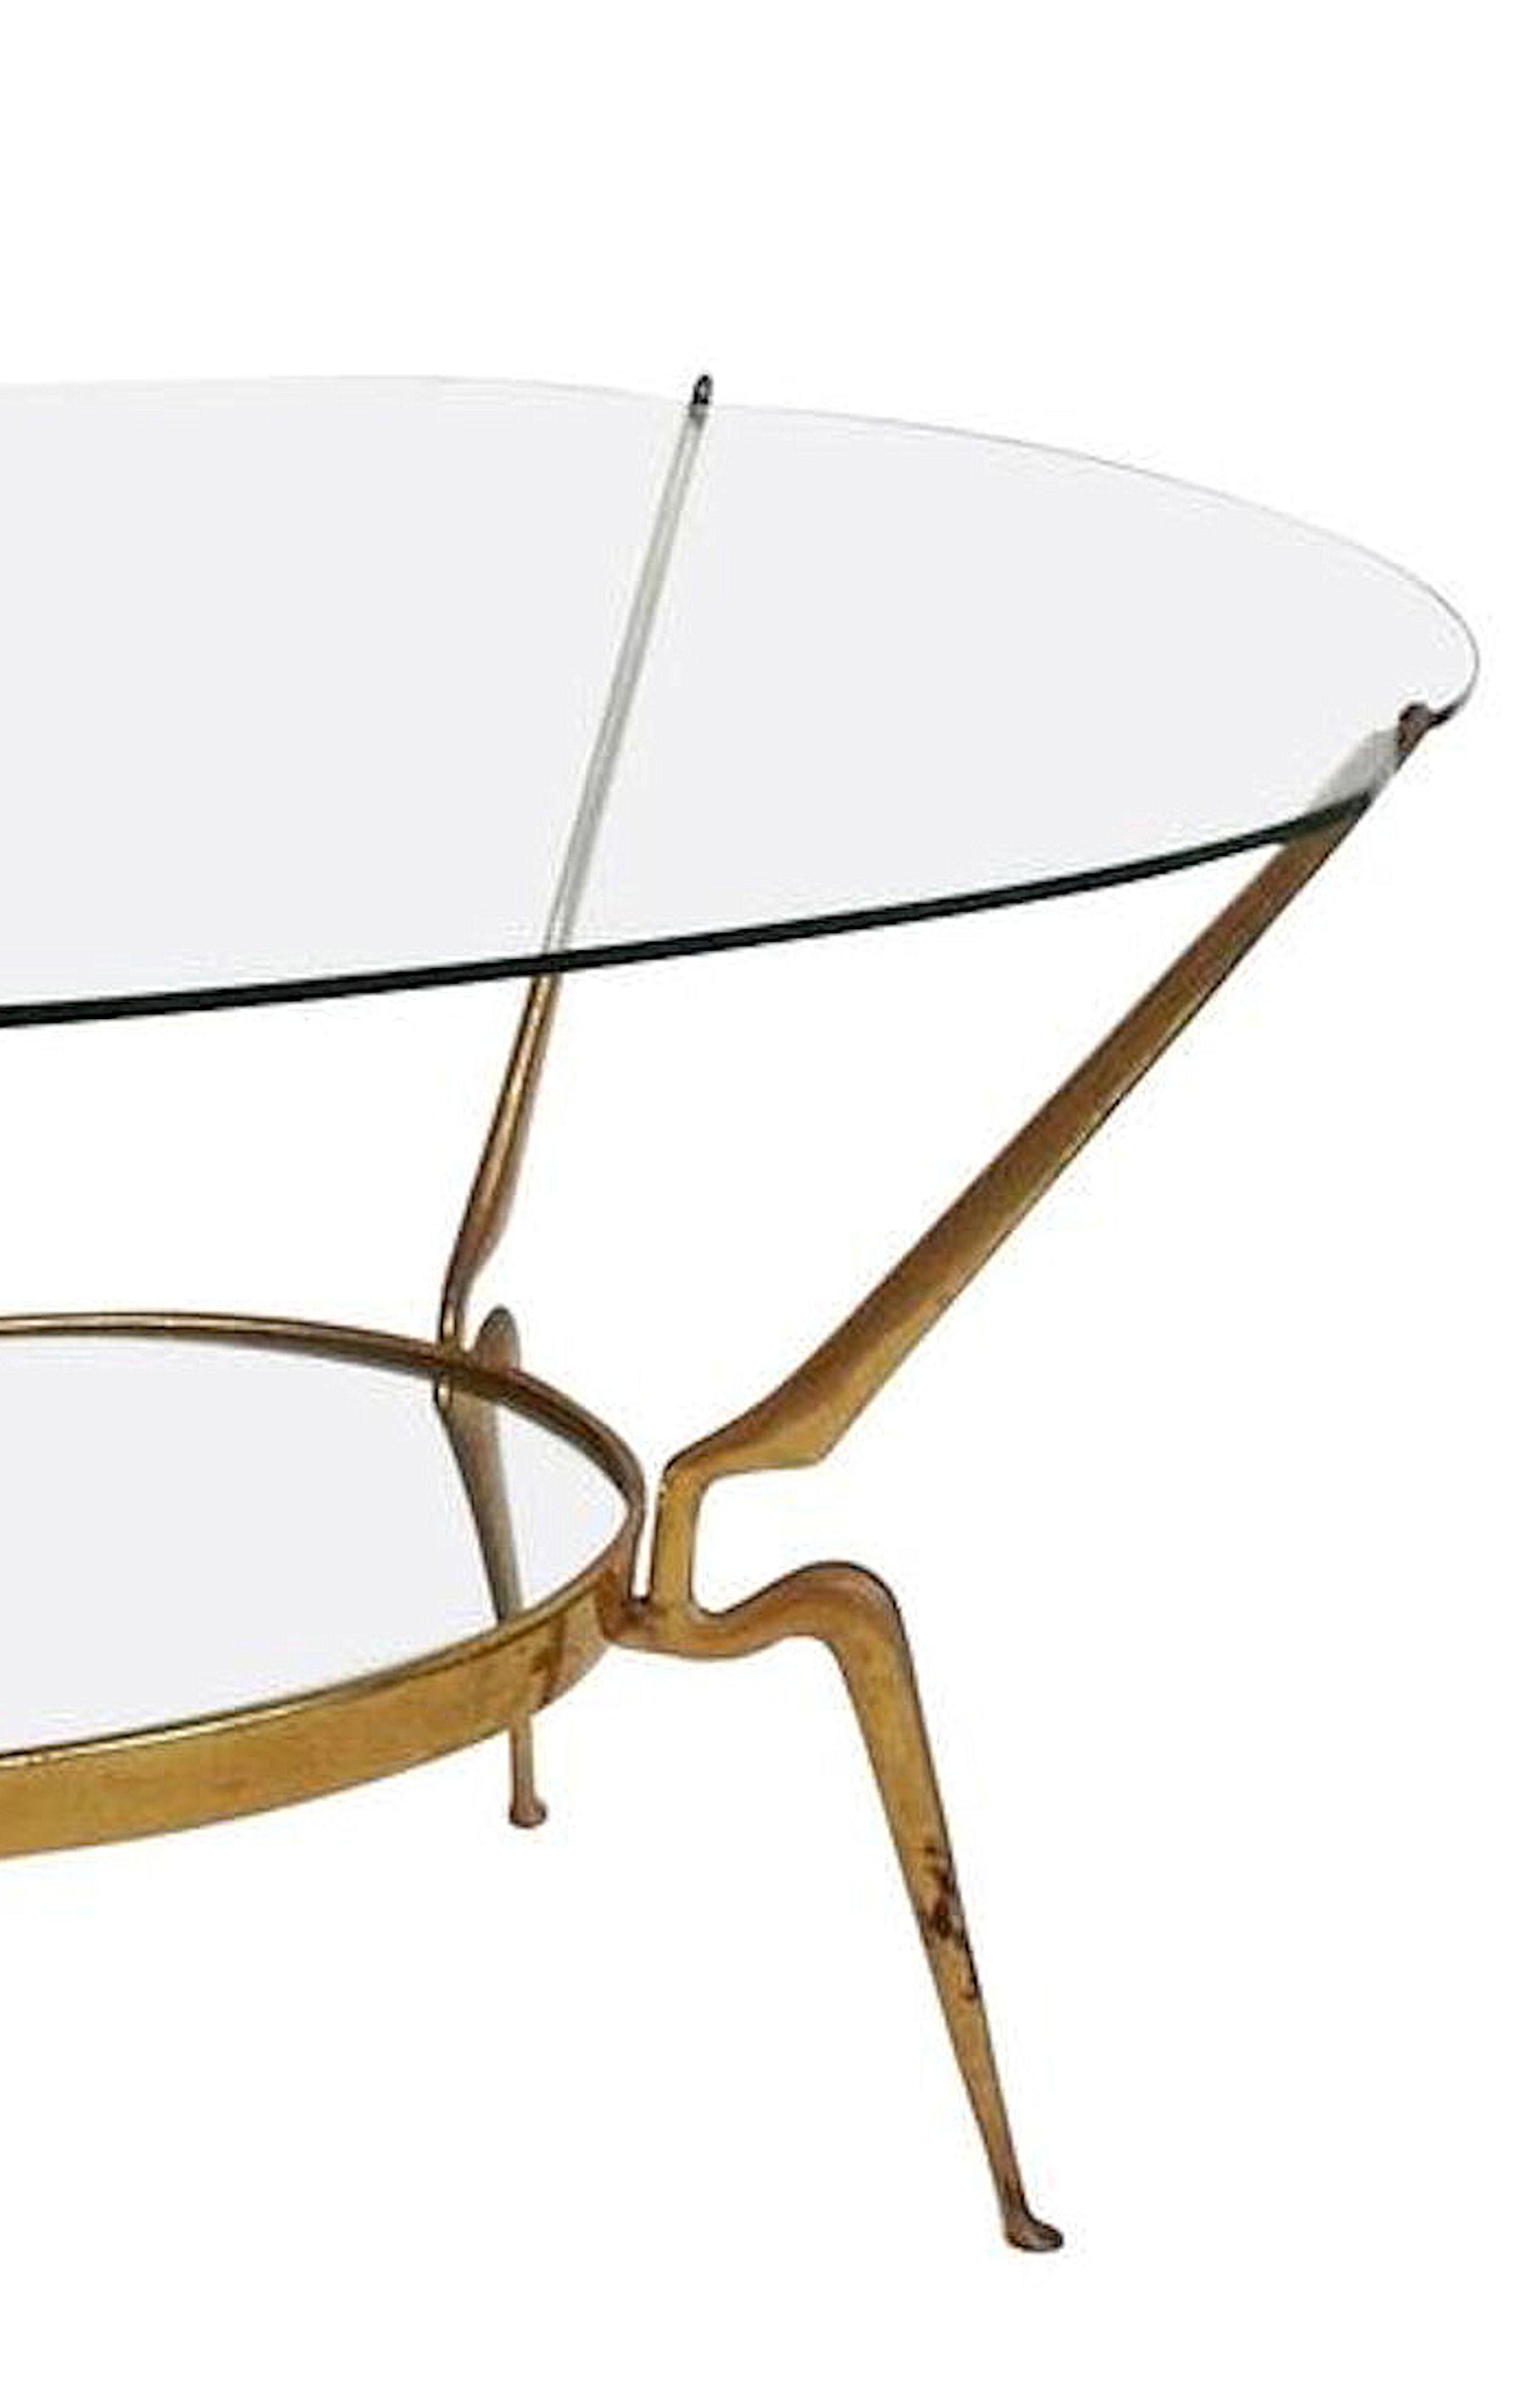 Brass and clear glass top coffee or side table, by Cesare Lacca, Italy, 1950s.
Oval shape clear glass top, curved brass legs, and clear mirror bottom shelf.
The brass legs have some patina, normal, with age, but no alterations.
Everything is